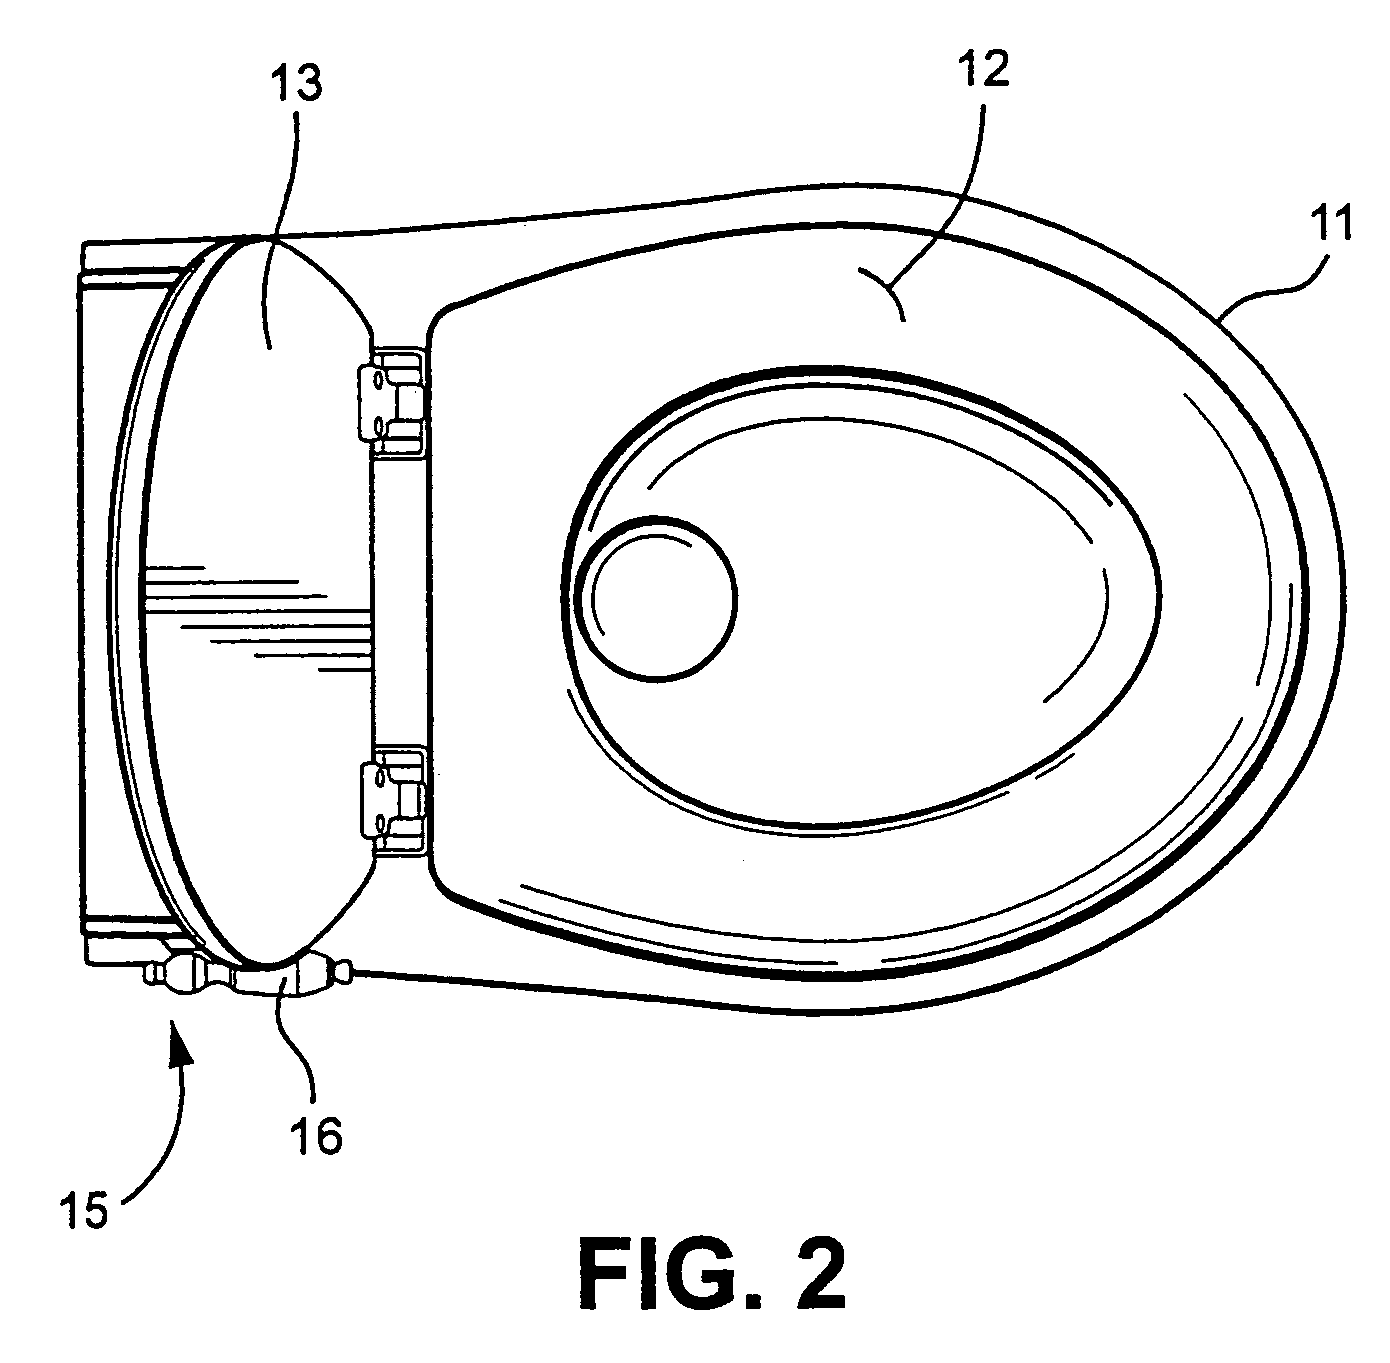 Toilet and method of operation